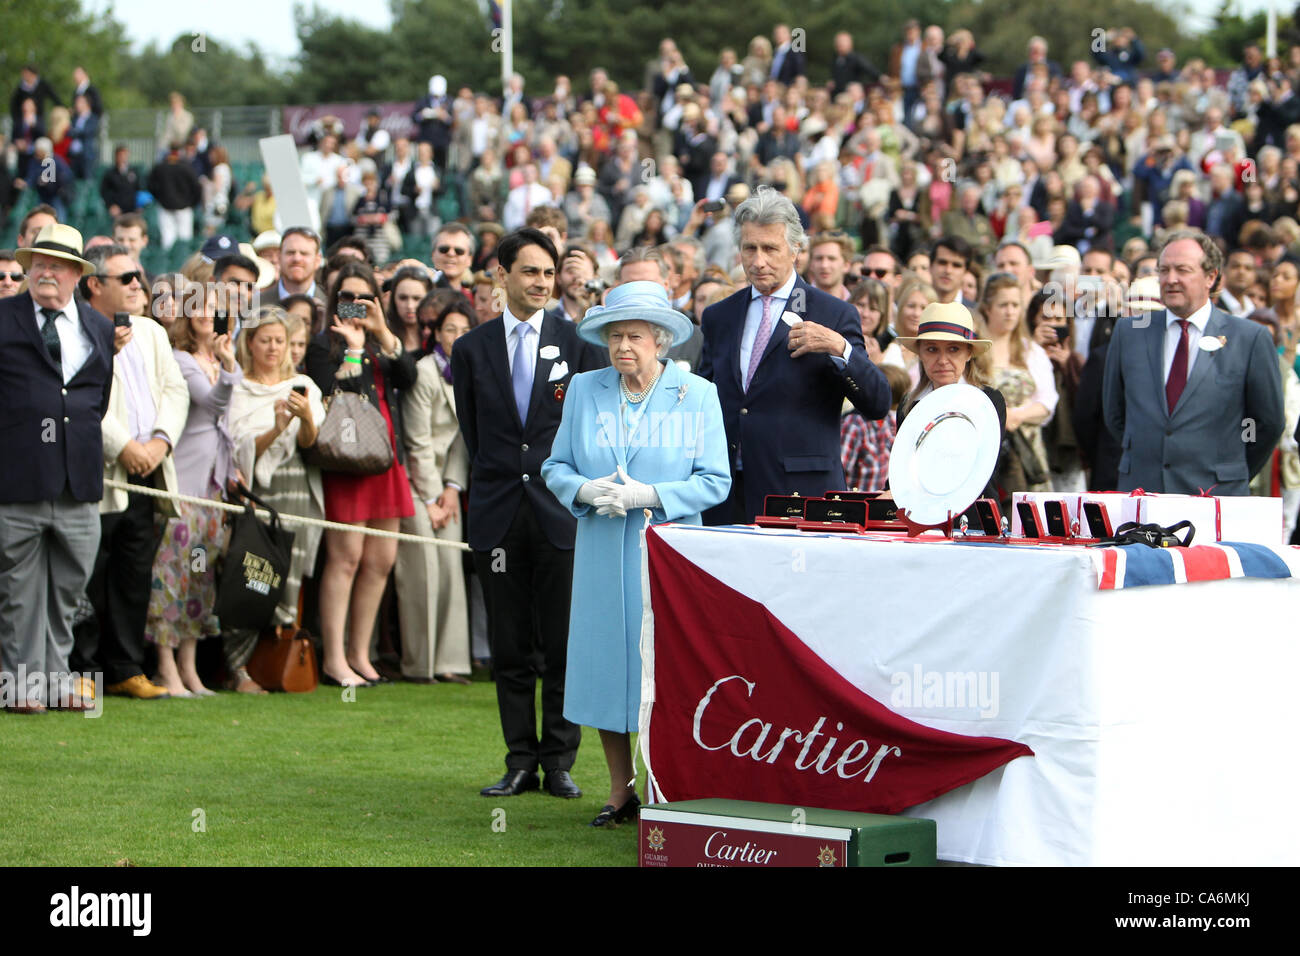 17.06.2012. Guards Polo Club, Windsor, Berkshire, England.  The Queen makese the awards presentation at The Cartier Queen's Cup Final 2012 - Guards Polo Club Stock Photo